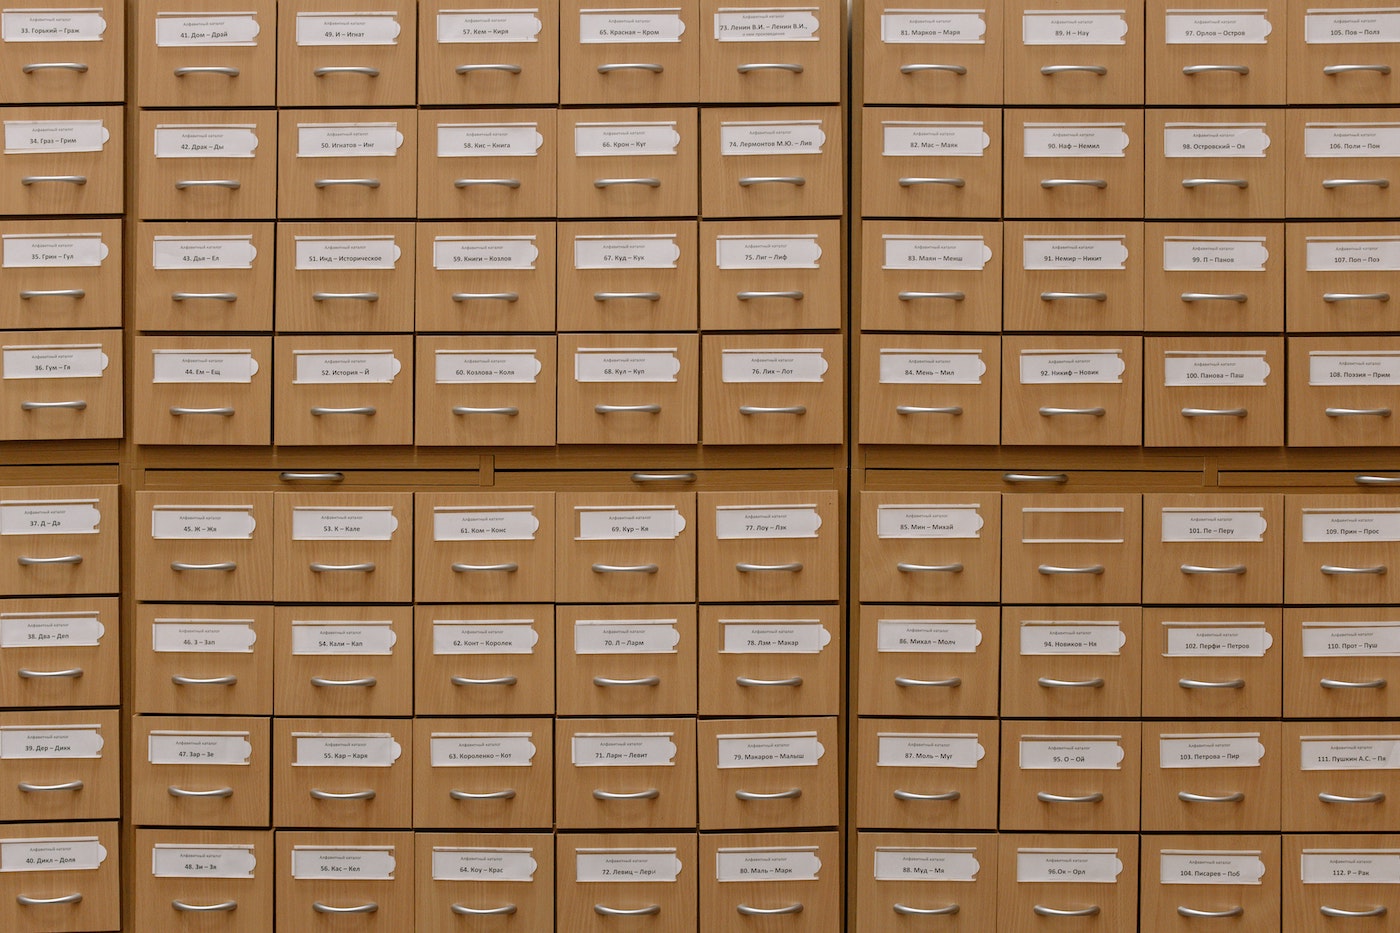 An image of a card catalog. 